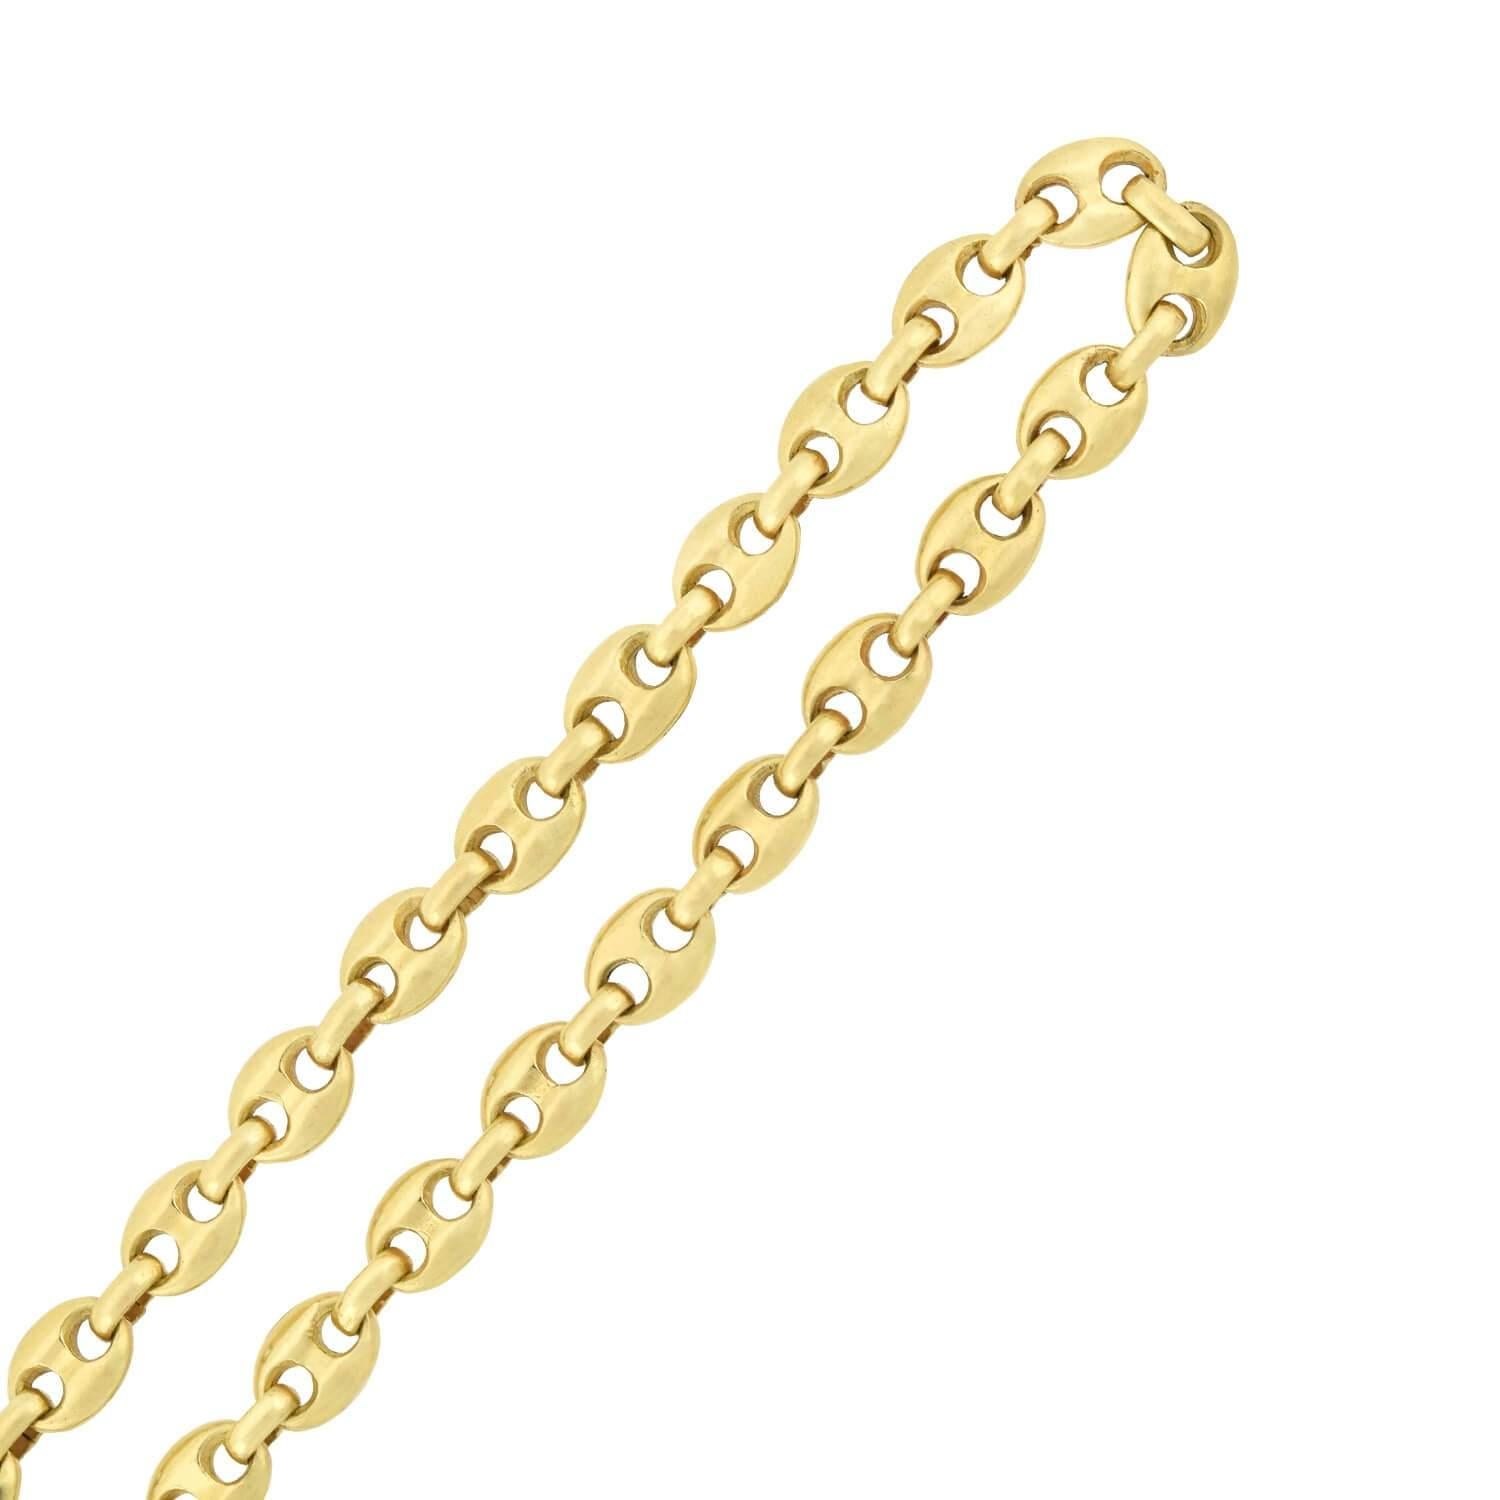 This fashionable contemporary chain necklace from the 1990s has a classic 